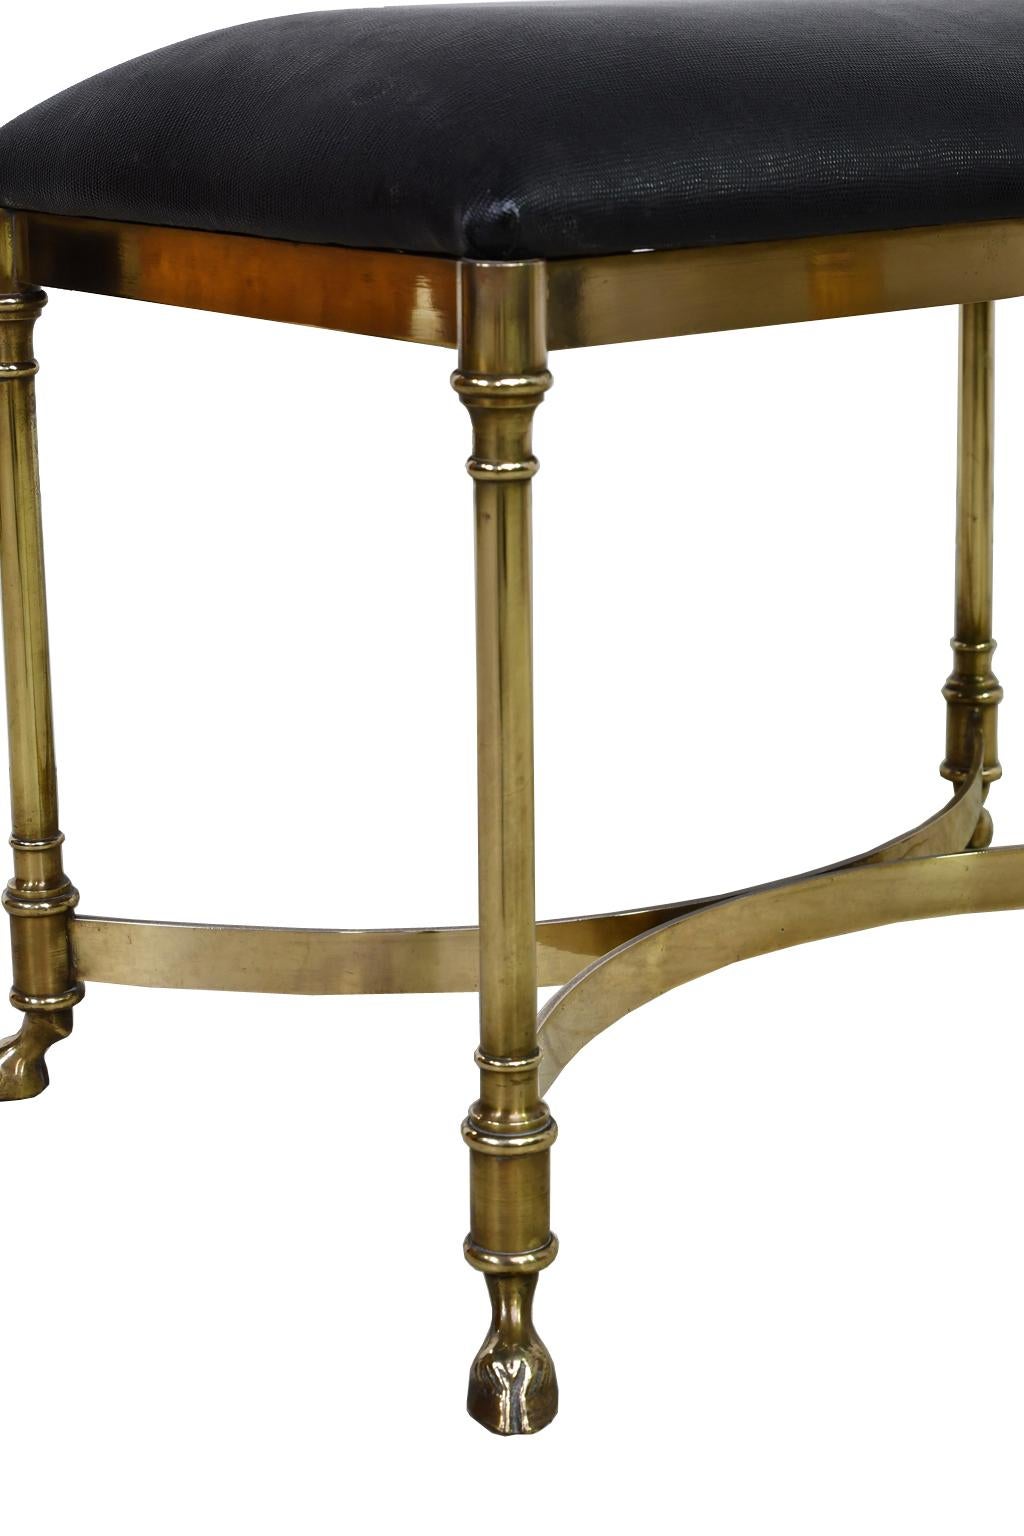 Neoclassical-Style Vintage Italian Stool w/ Brass Frame & Black Upholstered Seat 4